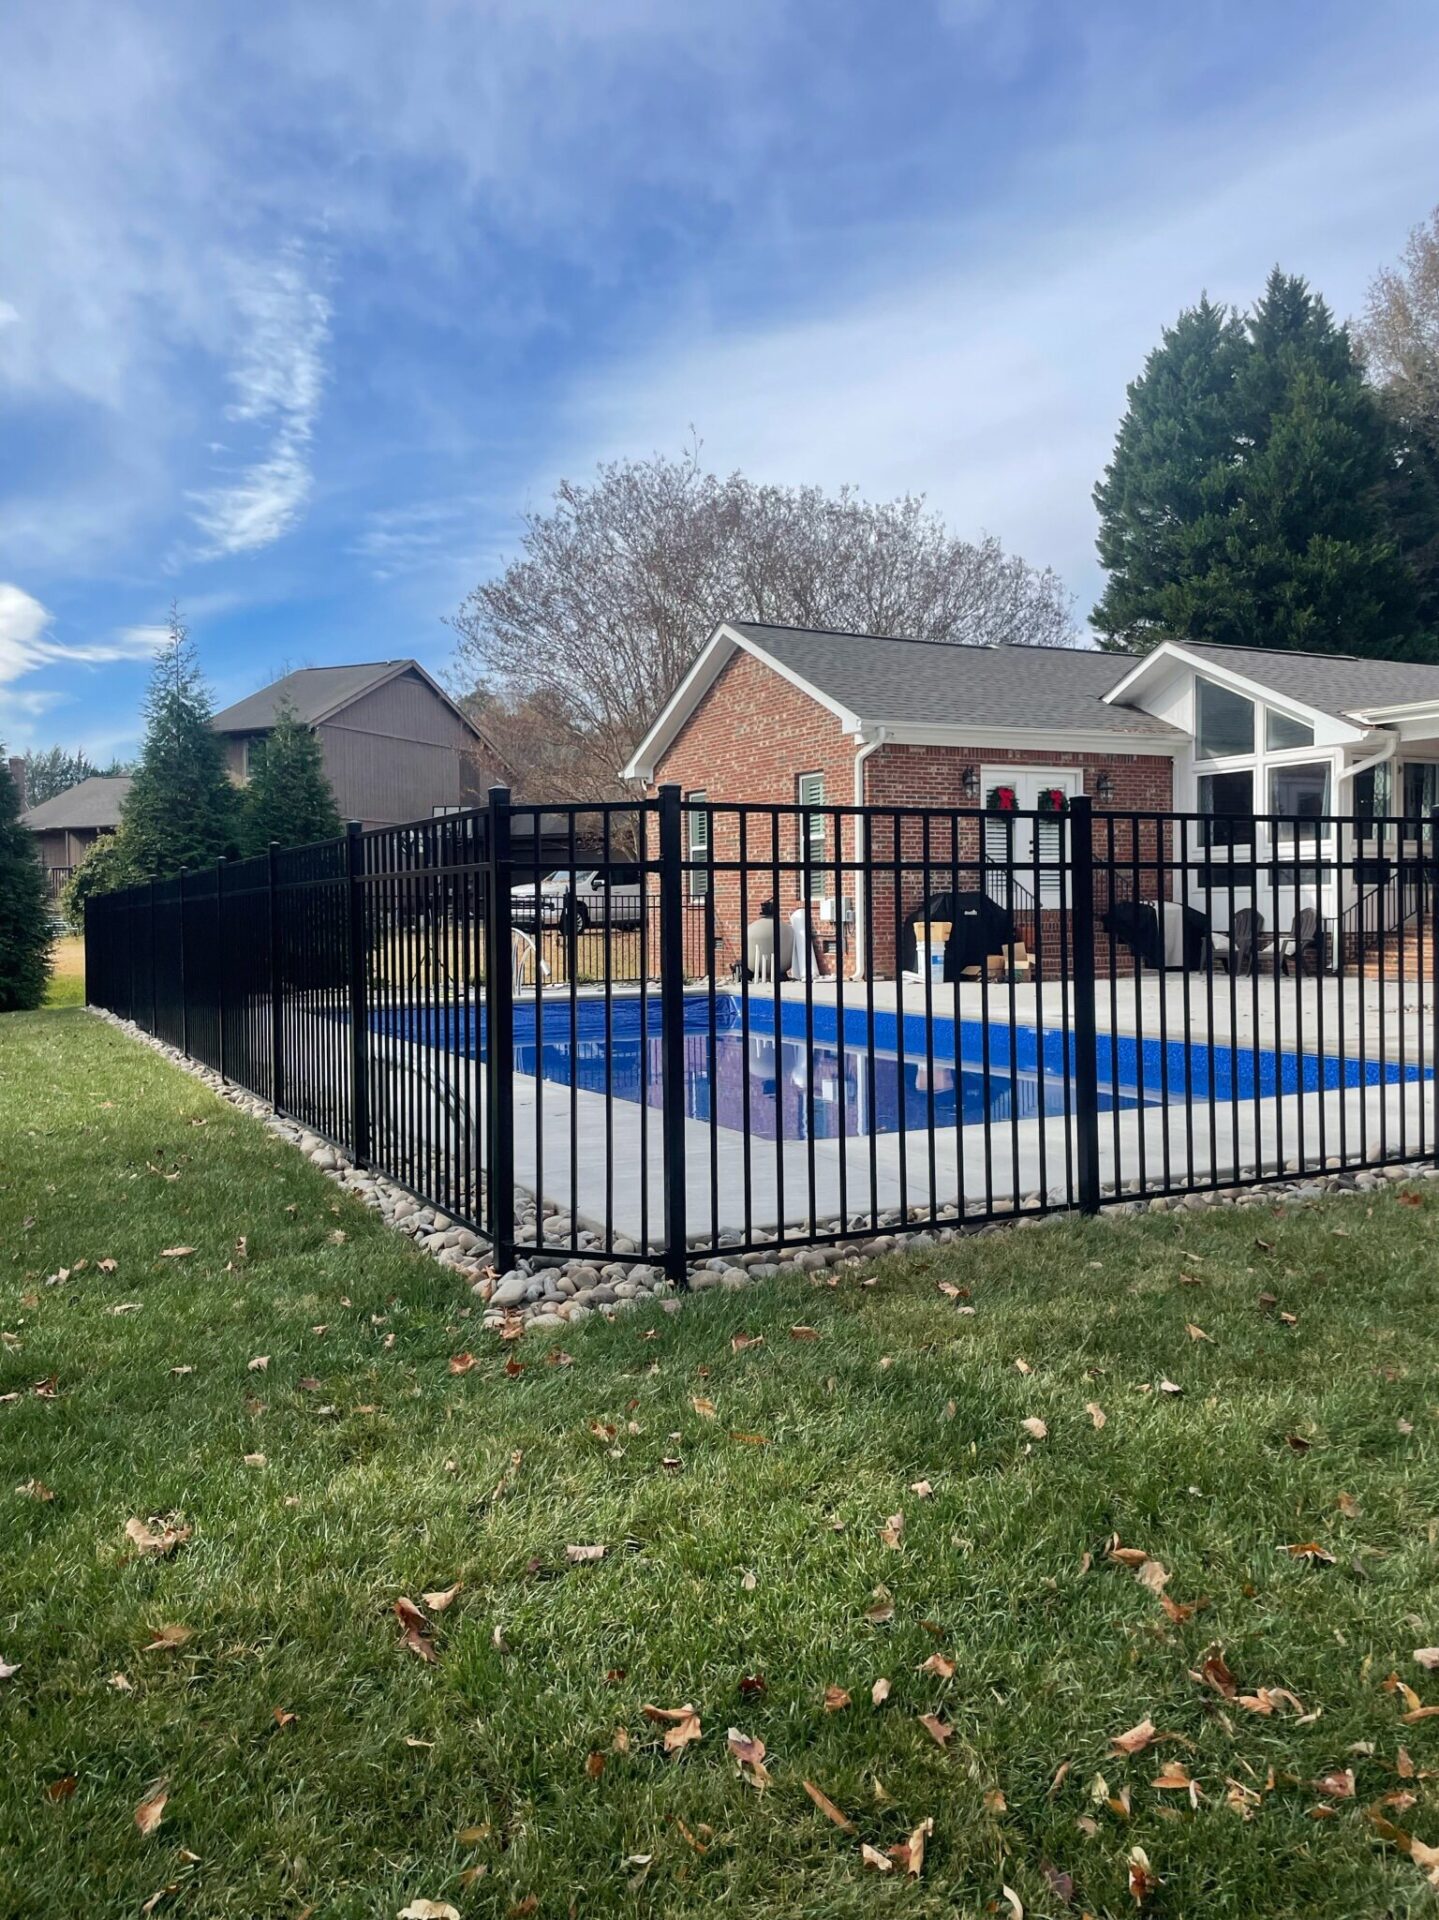 A black pool fence surrounds the pool.